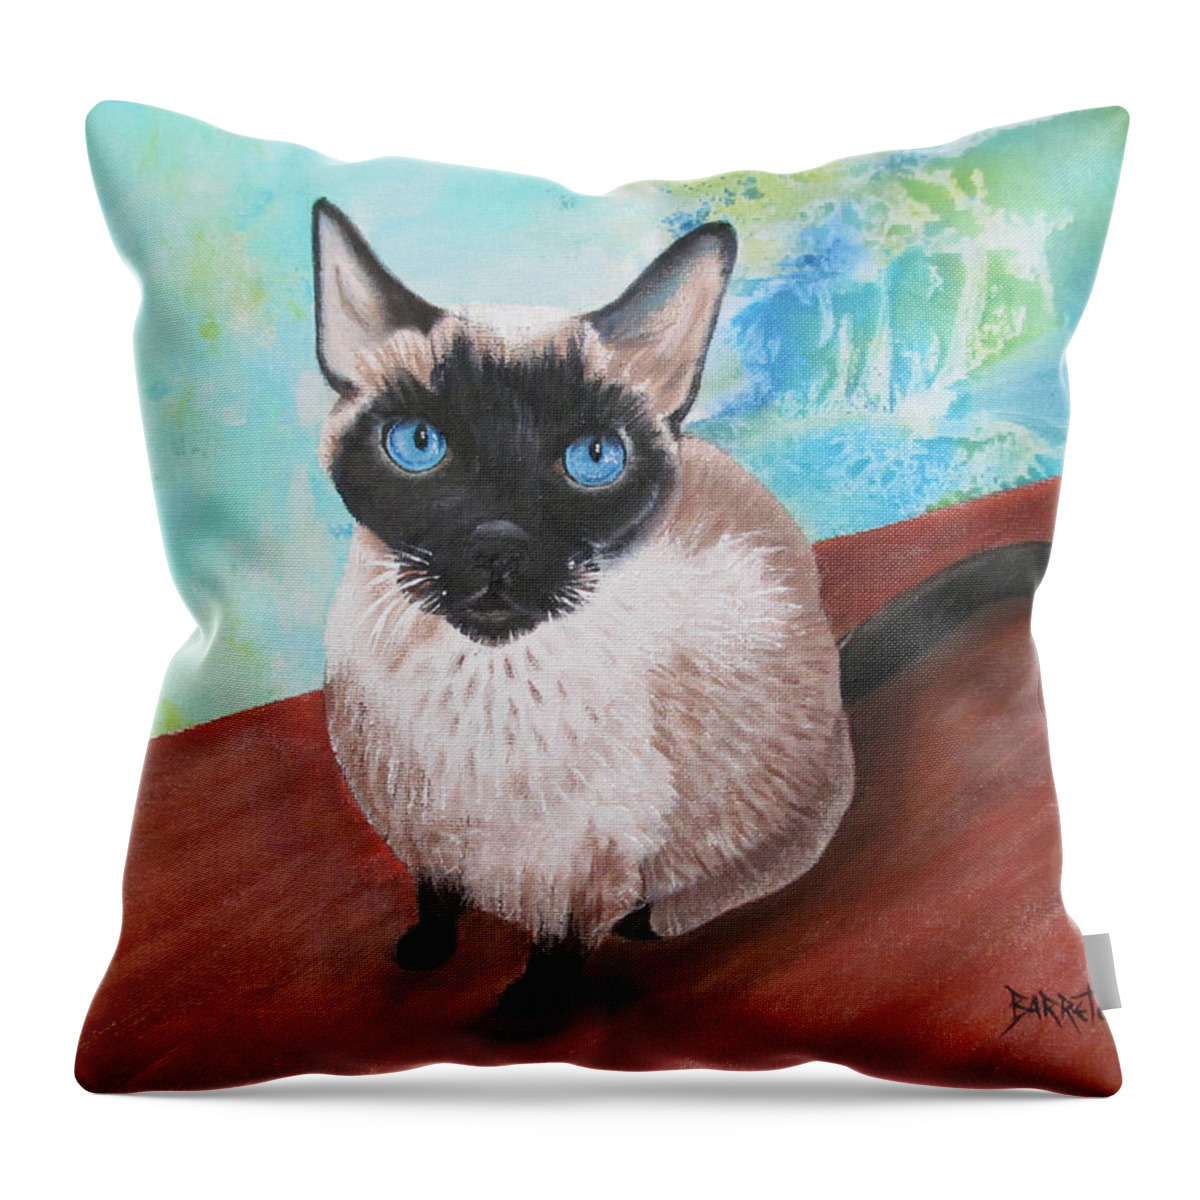 Siamese Cat Throw Pillow featuring the painting Siamese Cat by Gloria E Barreto-Rodriguez